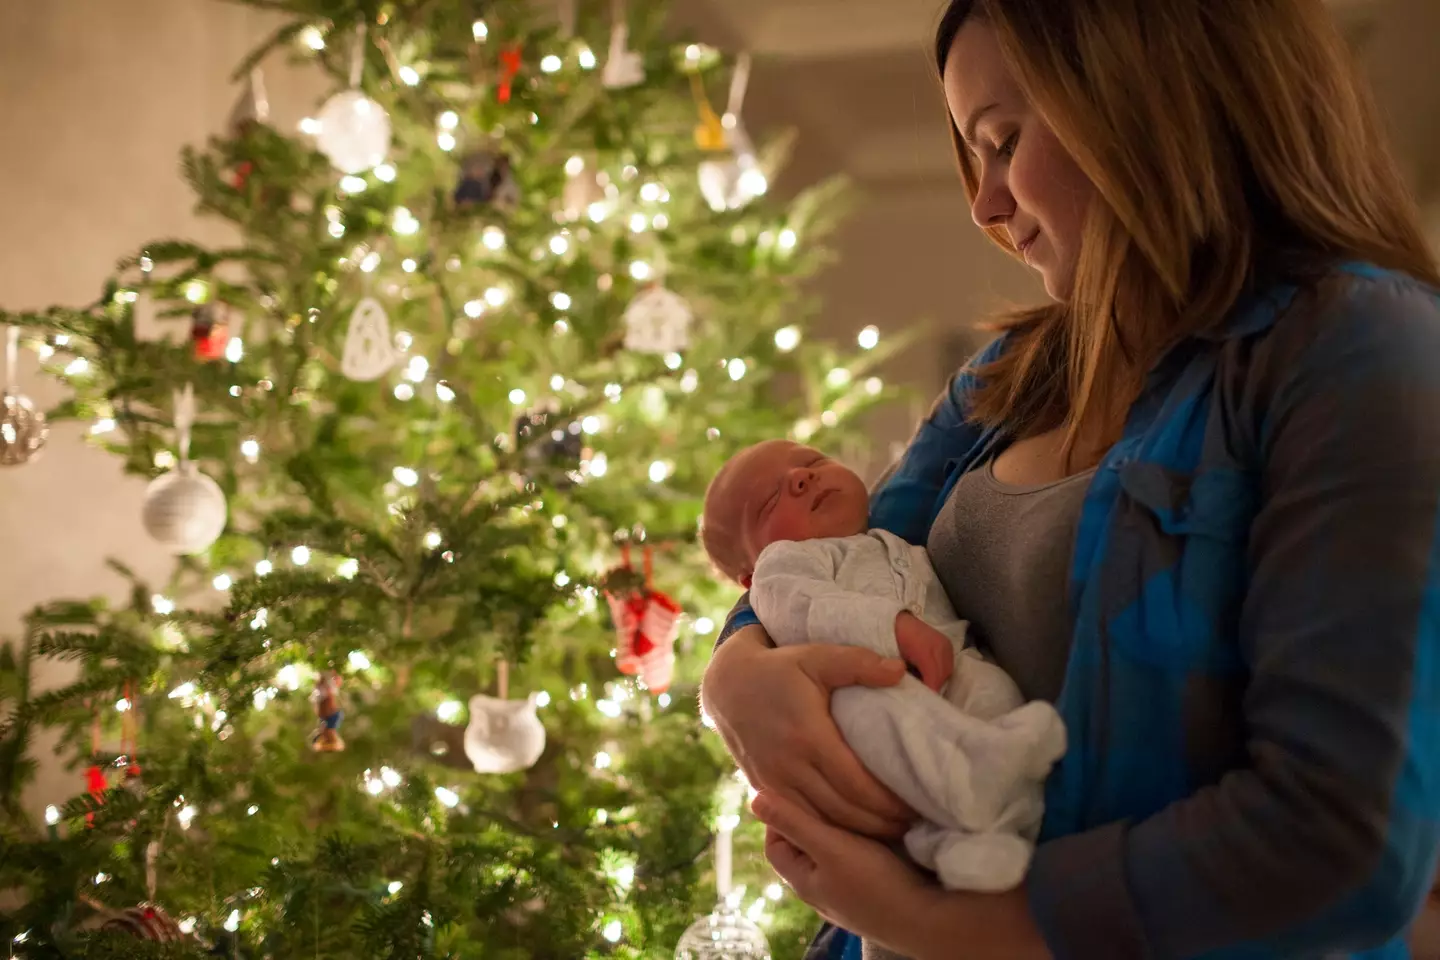 Jami and Rumi weren't the only festive babies to arrive this Christmas!